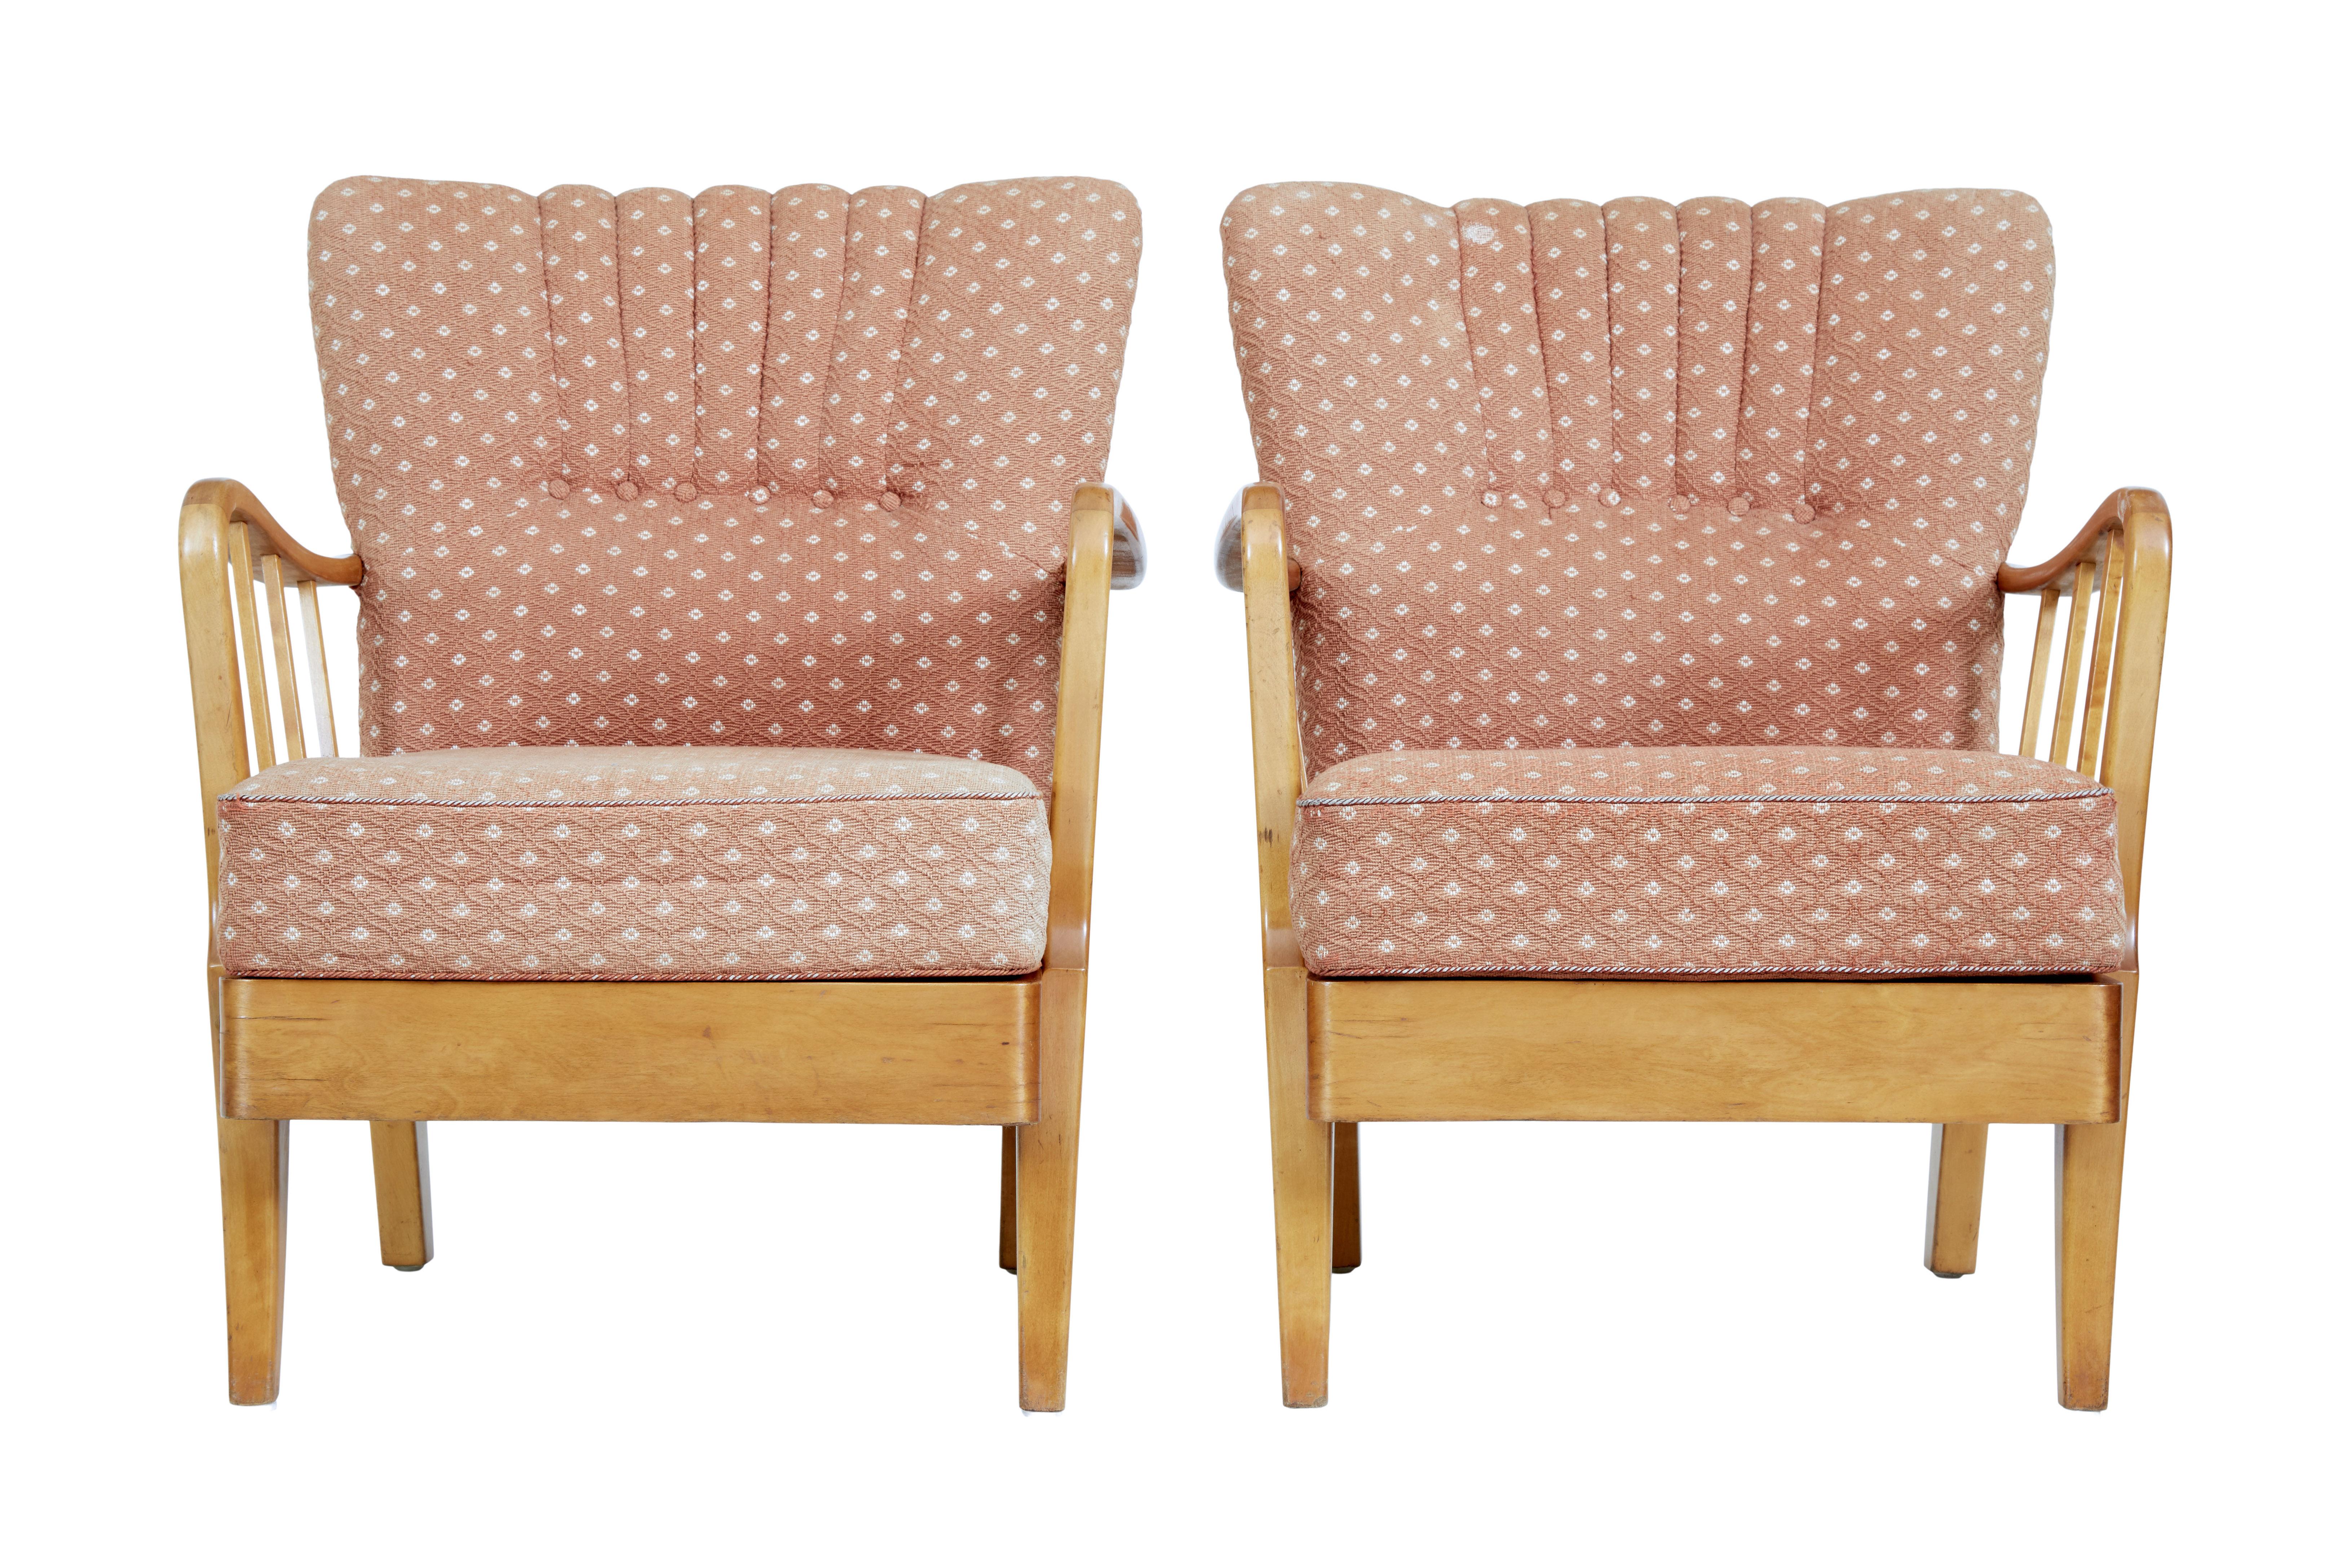 Pair of mid 20th century Swedish birch armchairs circa 1950.

Good quality pair of mid century armchairs, with Art Deco influenced scalloped back rest, and removable seat cushion. Shaped showframe arms. Standing on tapering legs.

Original